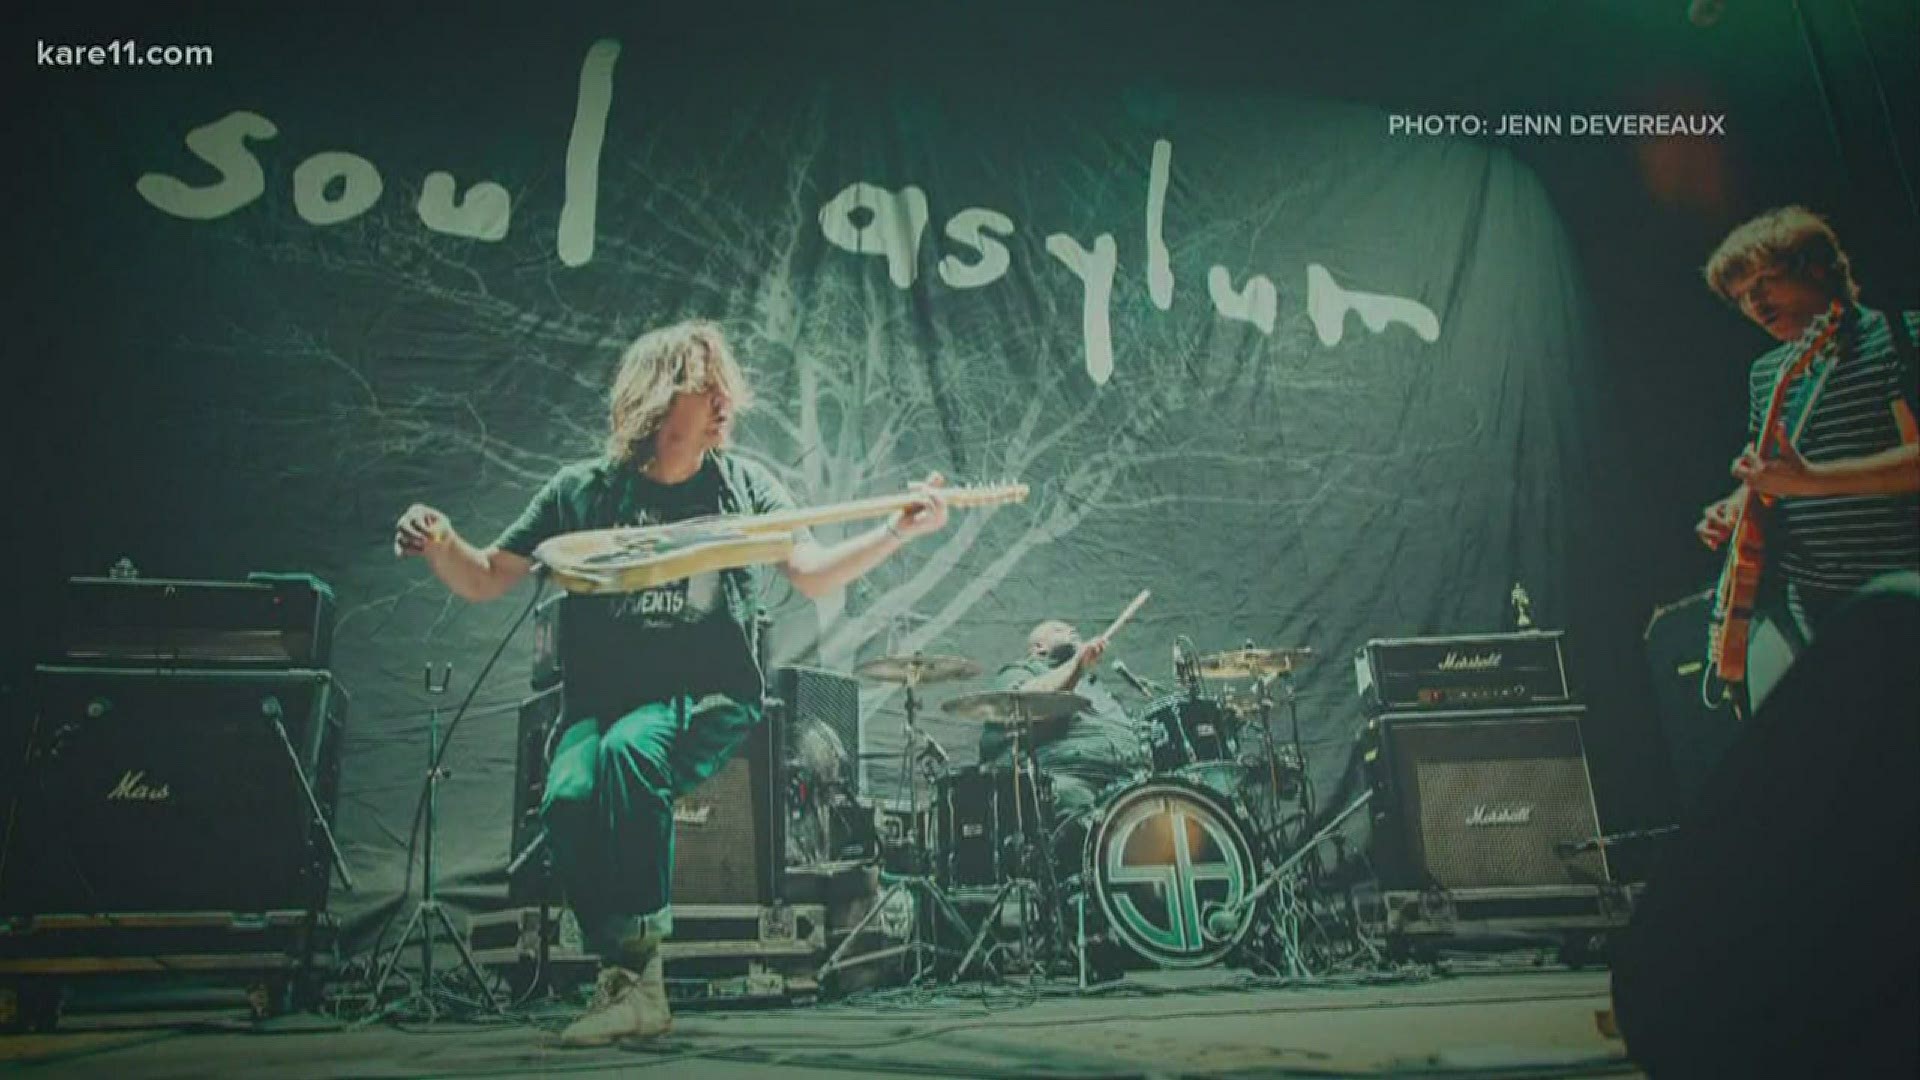 Soul Asylum will join many other local artists Friday for MN Bands Together, a virtual concert presented by KARE 11 to support the Twin Cities United Way.